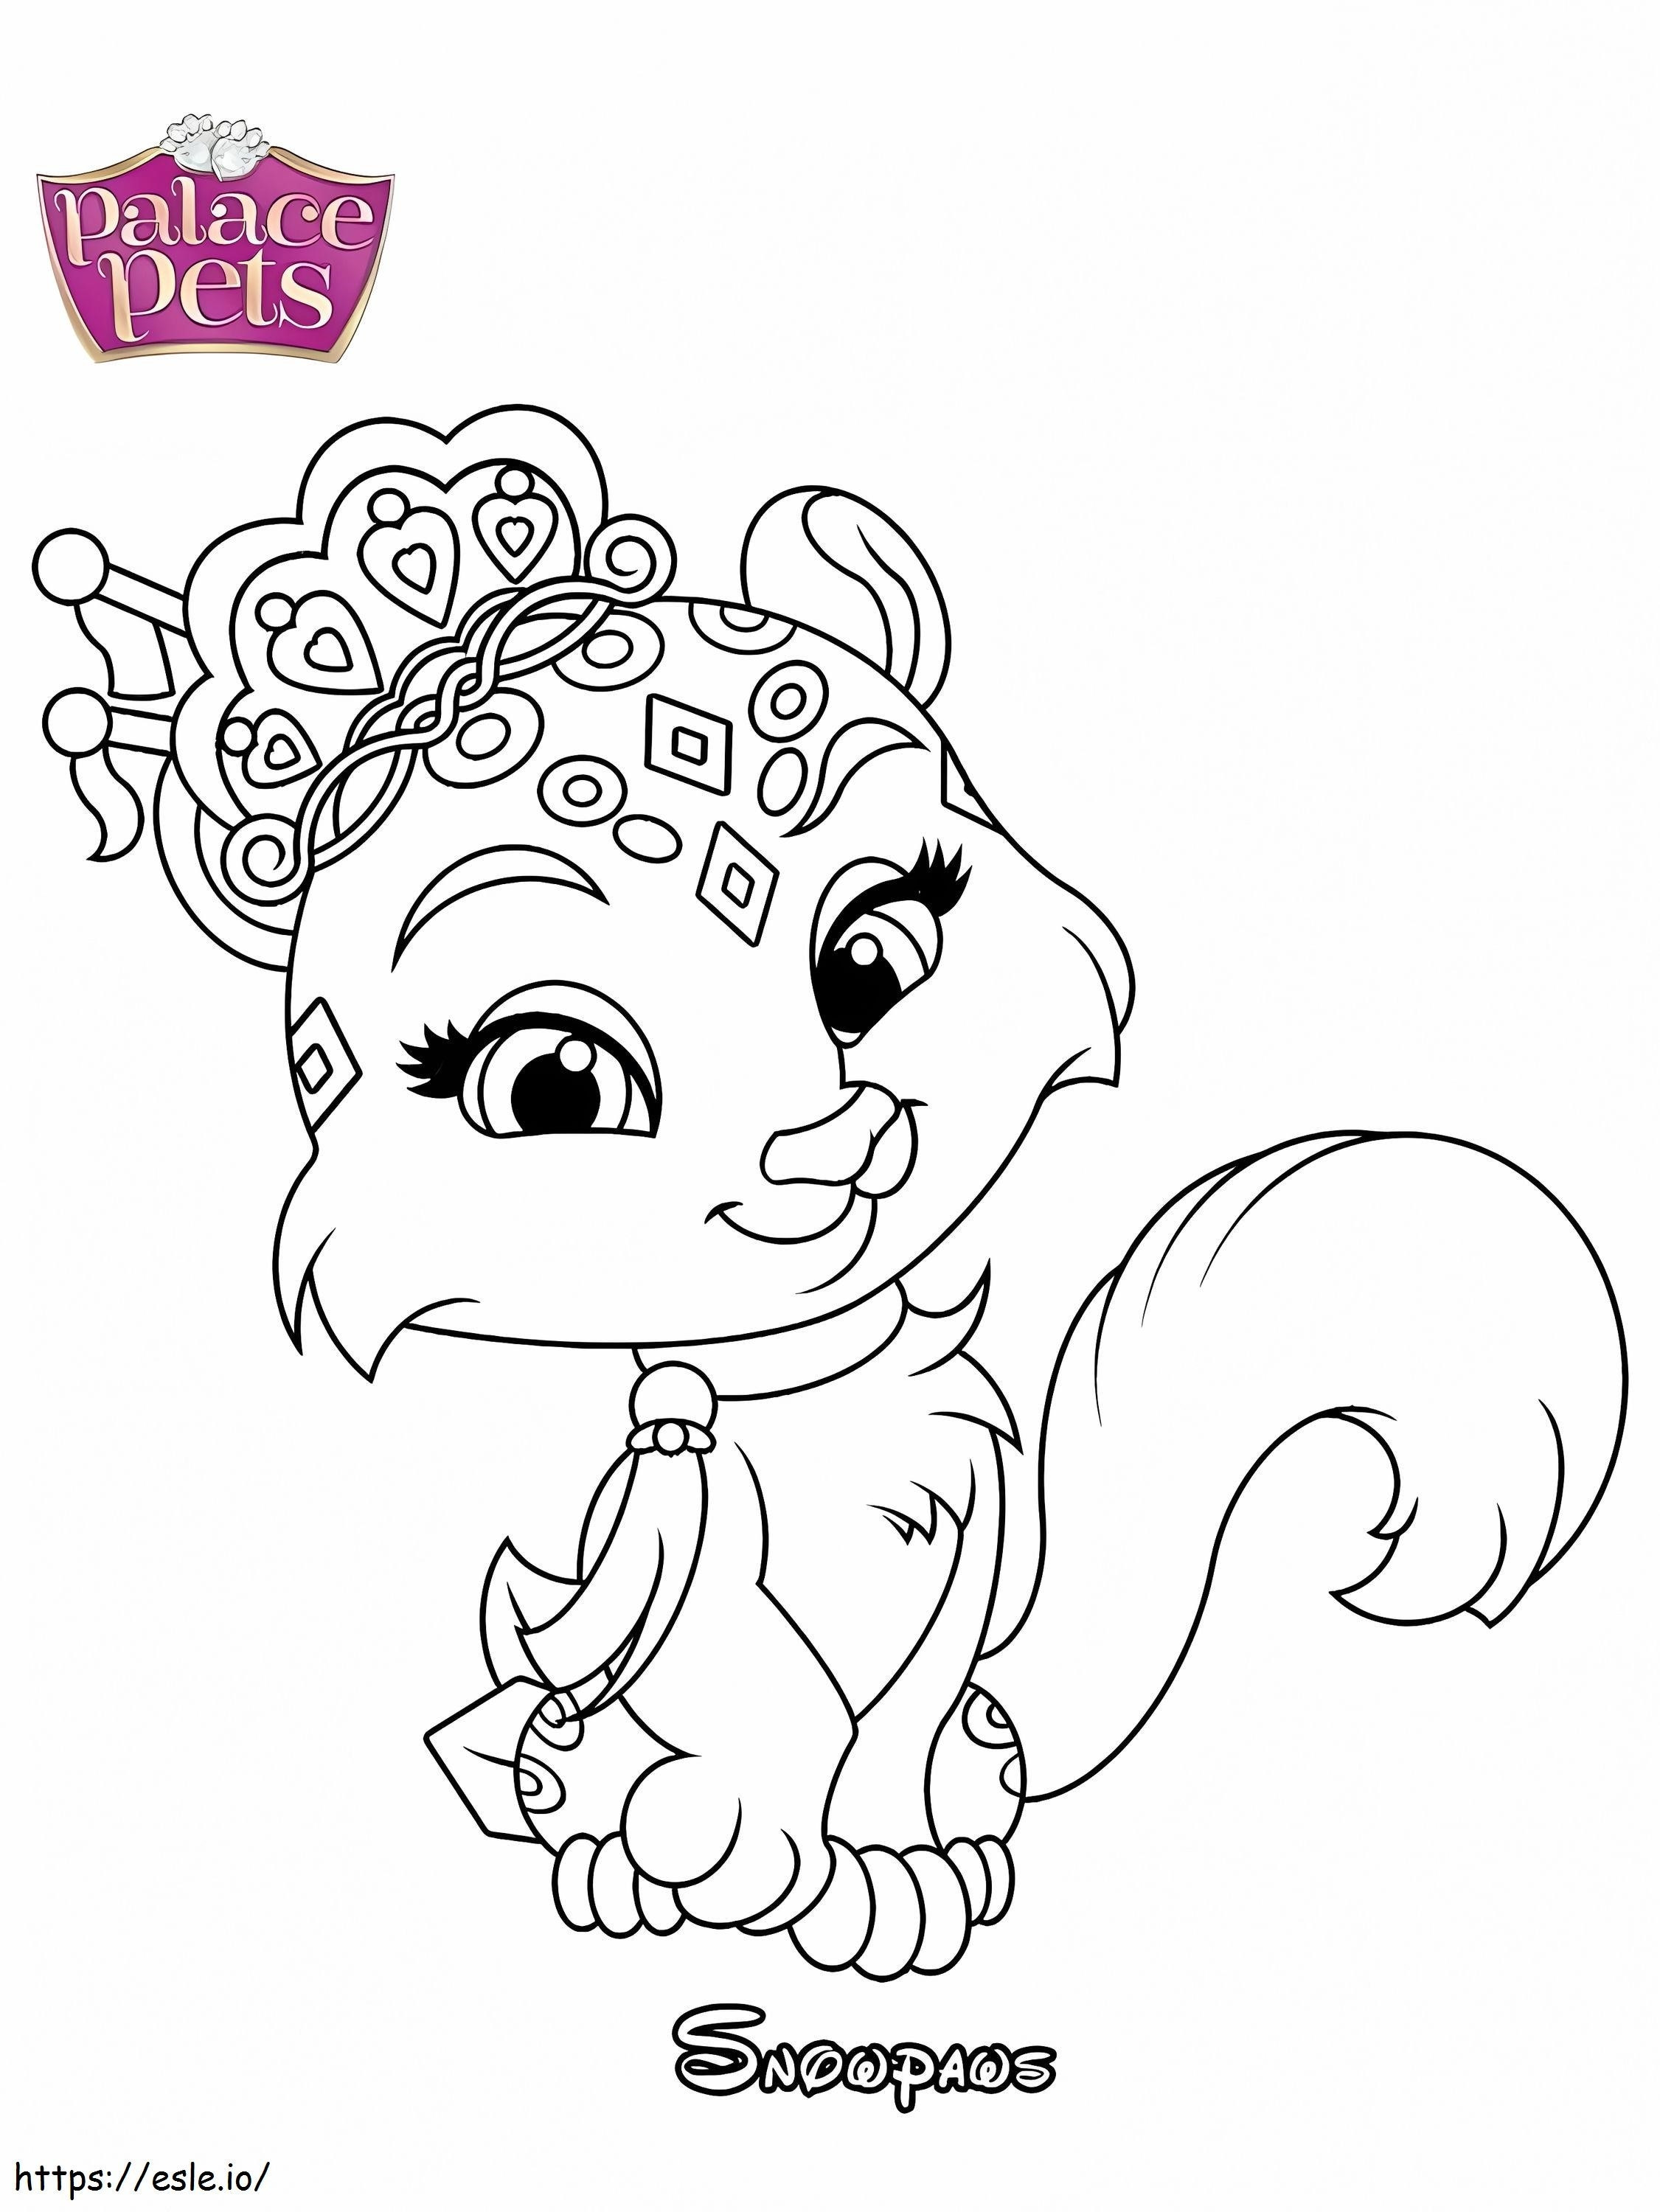 1587087907 Palace Pets Snowpaws coloring page